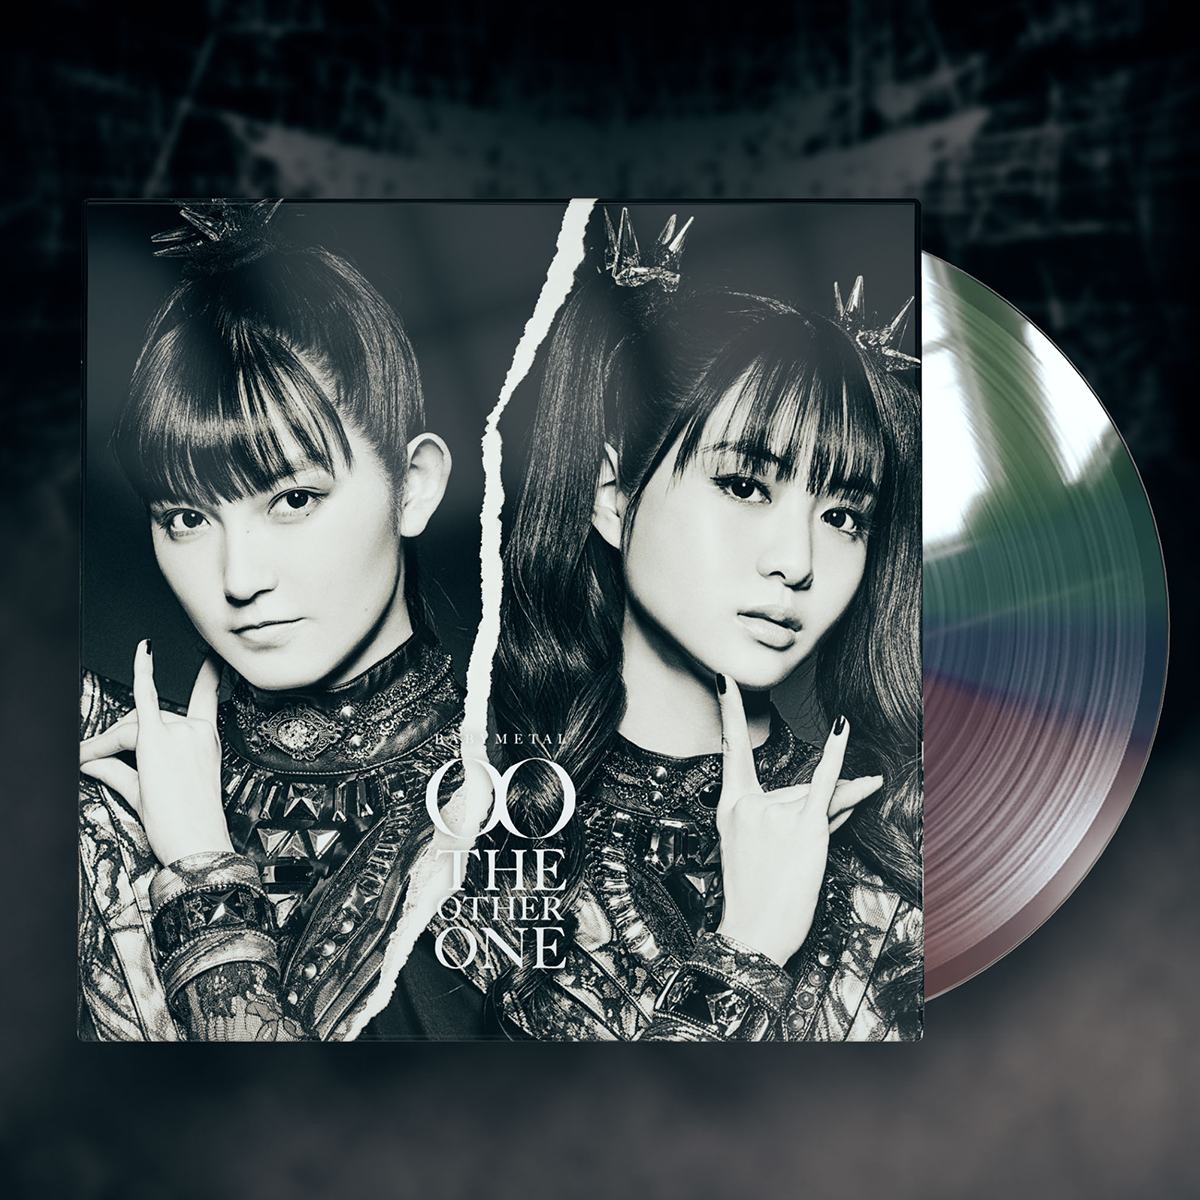 THE OTHER ONE CD - MONOCHROME VERSION (BABYMETAL STORE EXCLUSIVE)